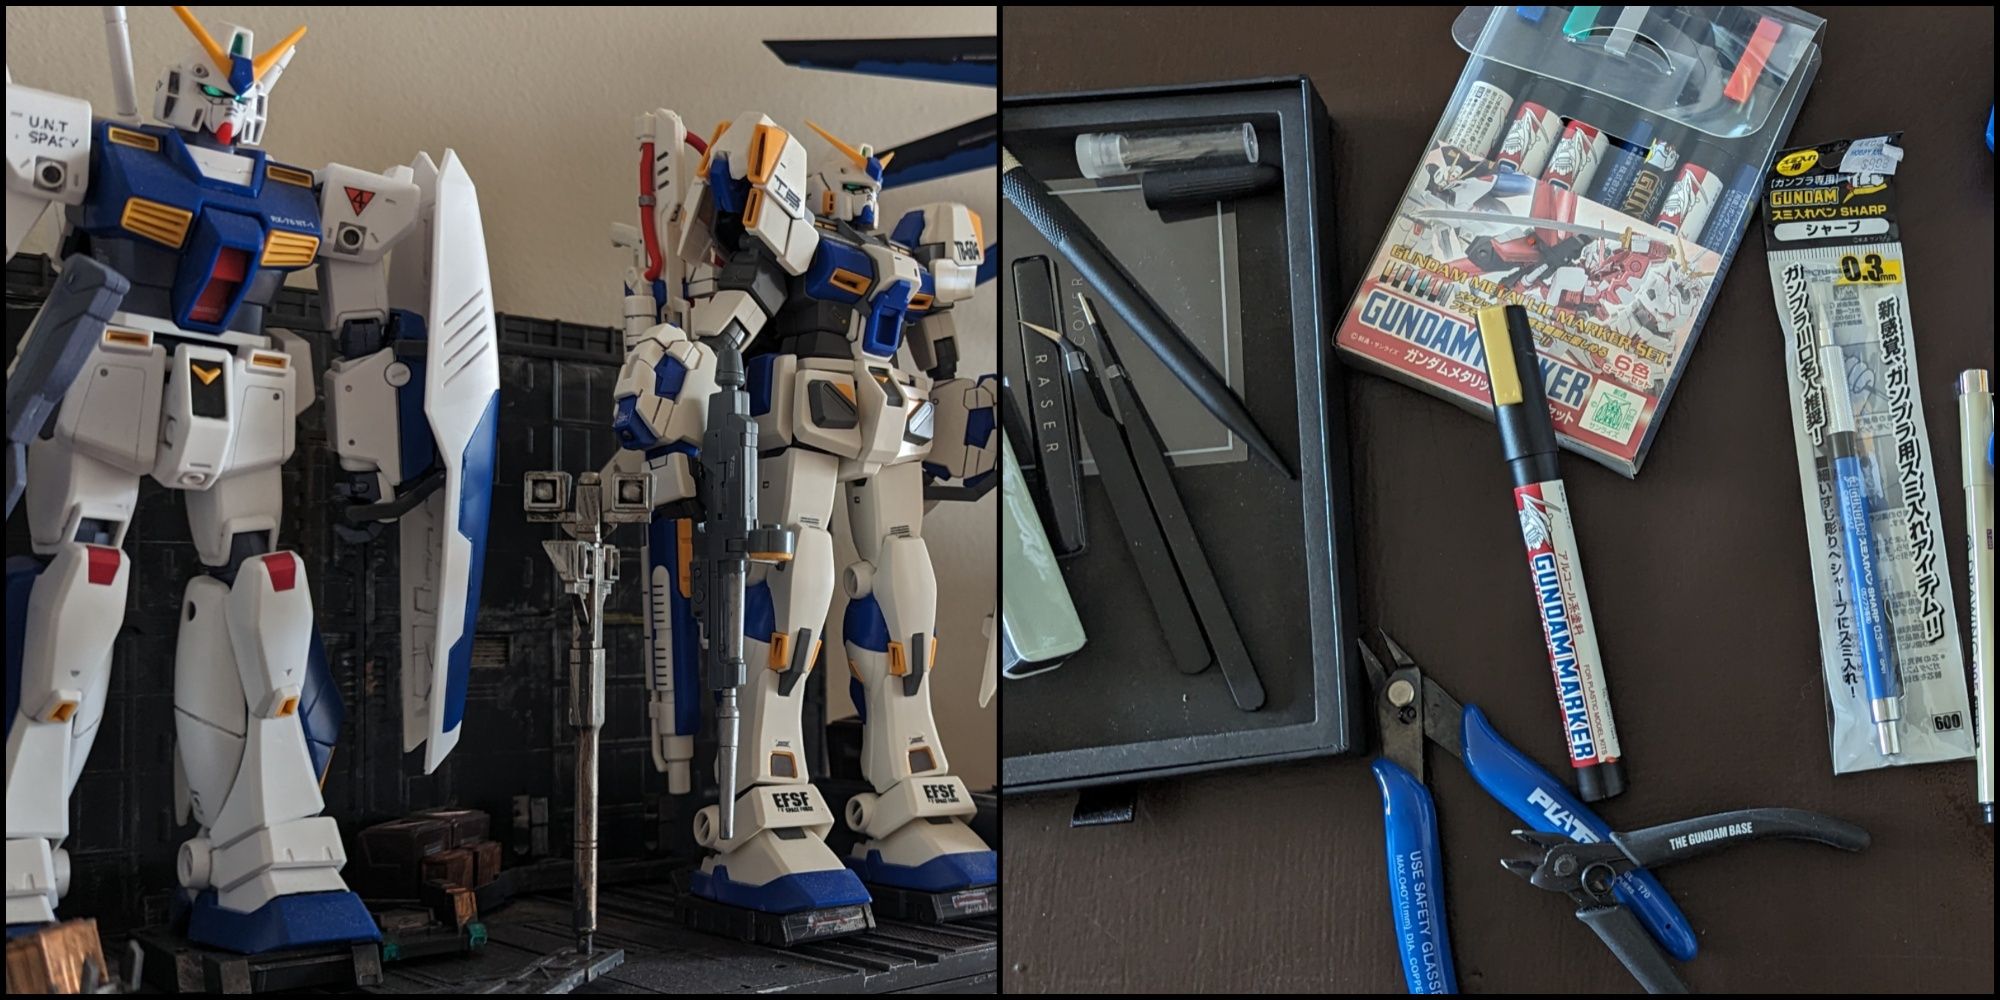 Wholesale gundam tools Crafted To Perform Many Other Tasks